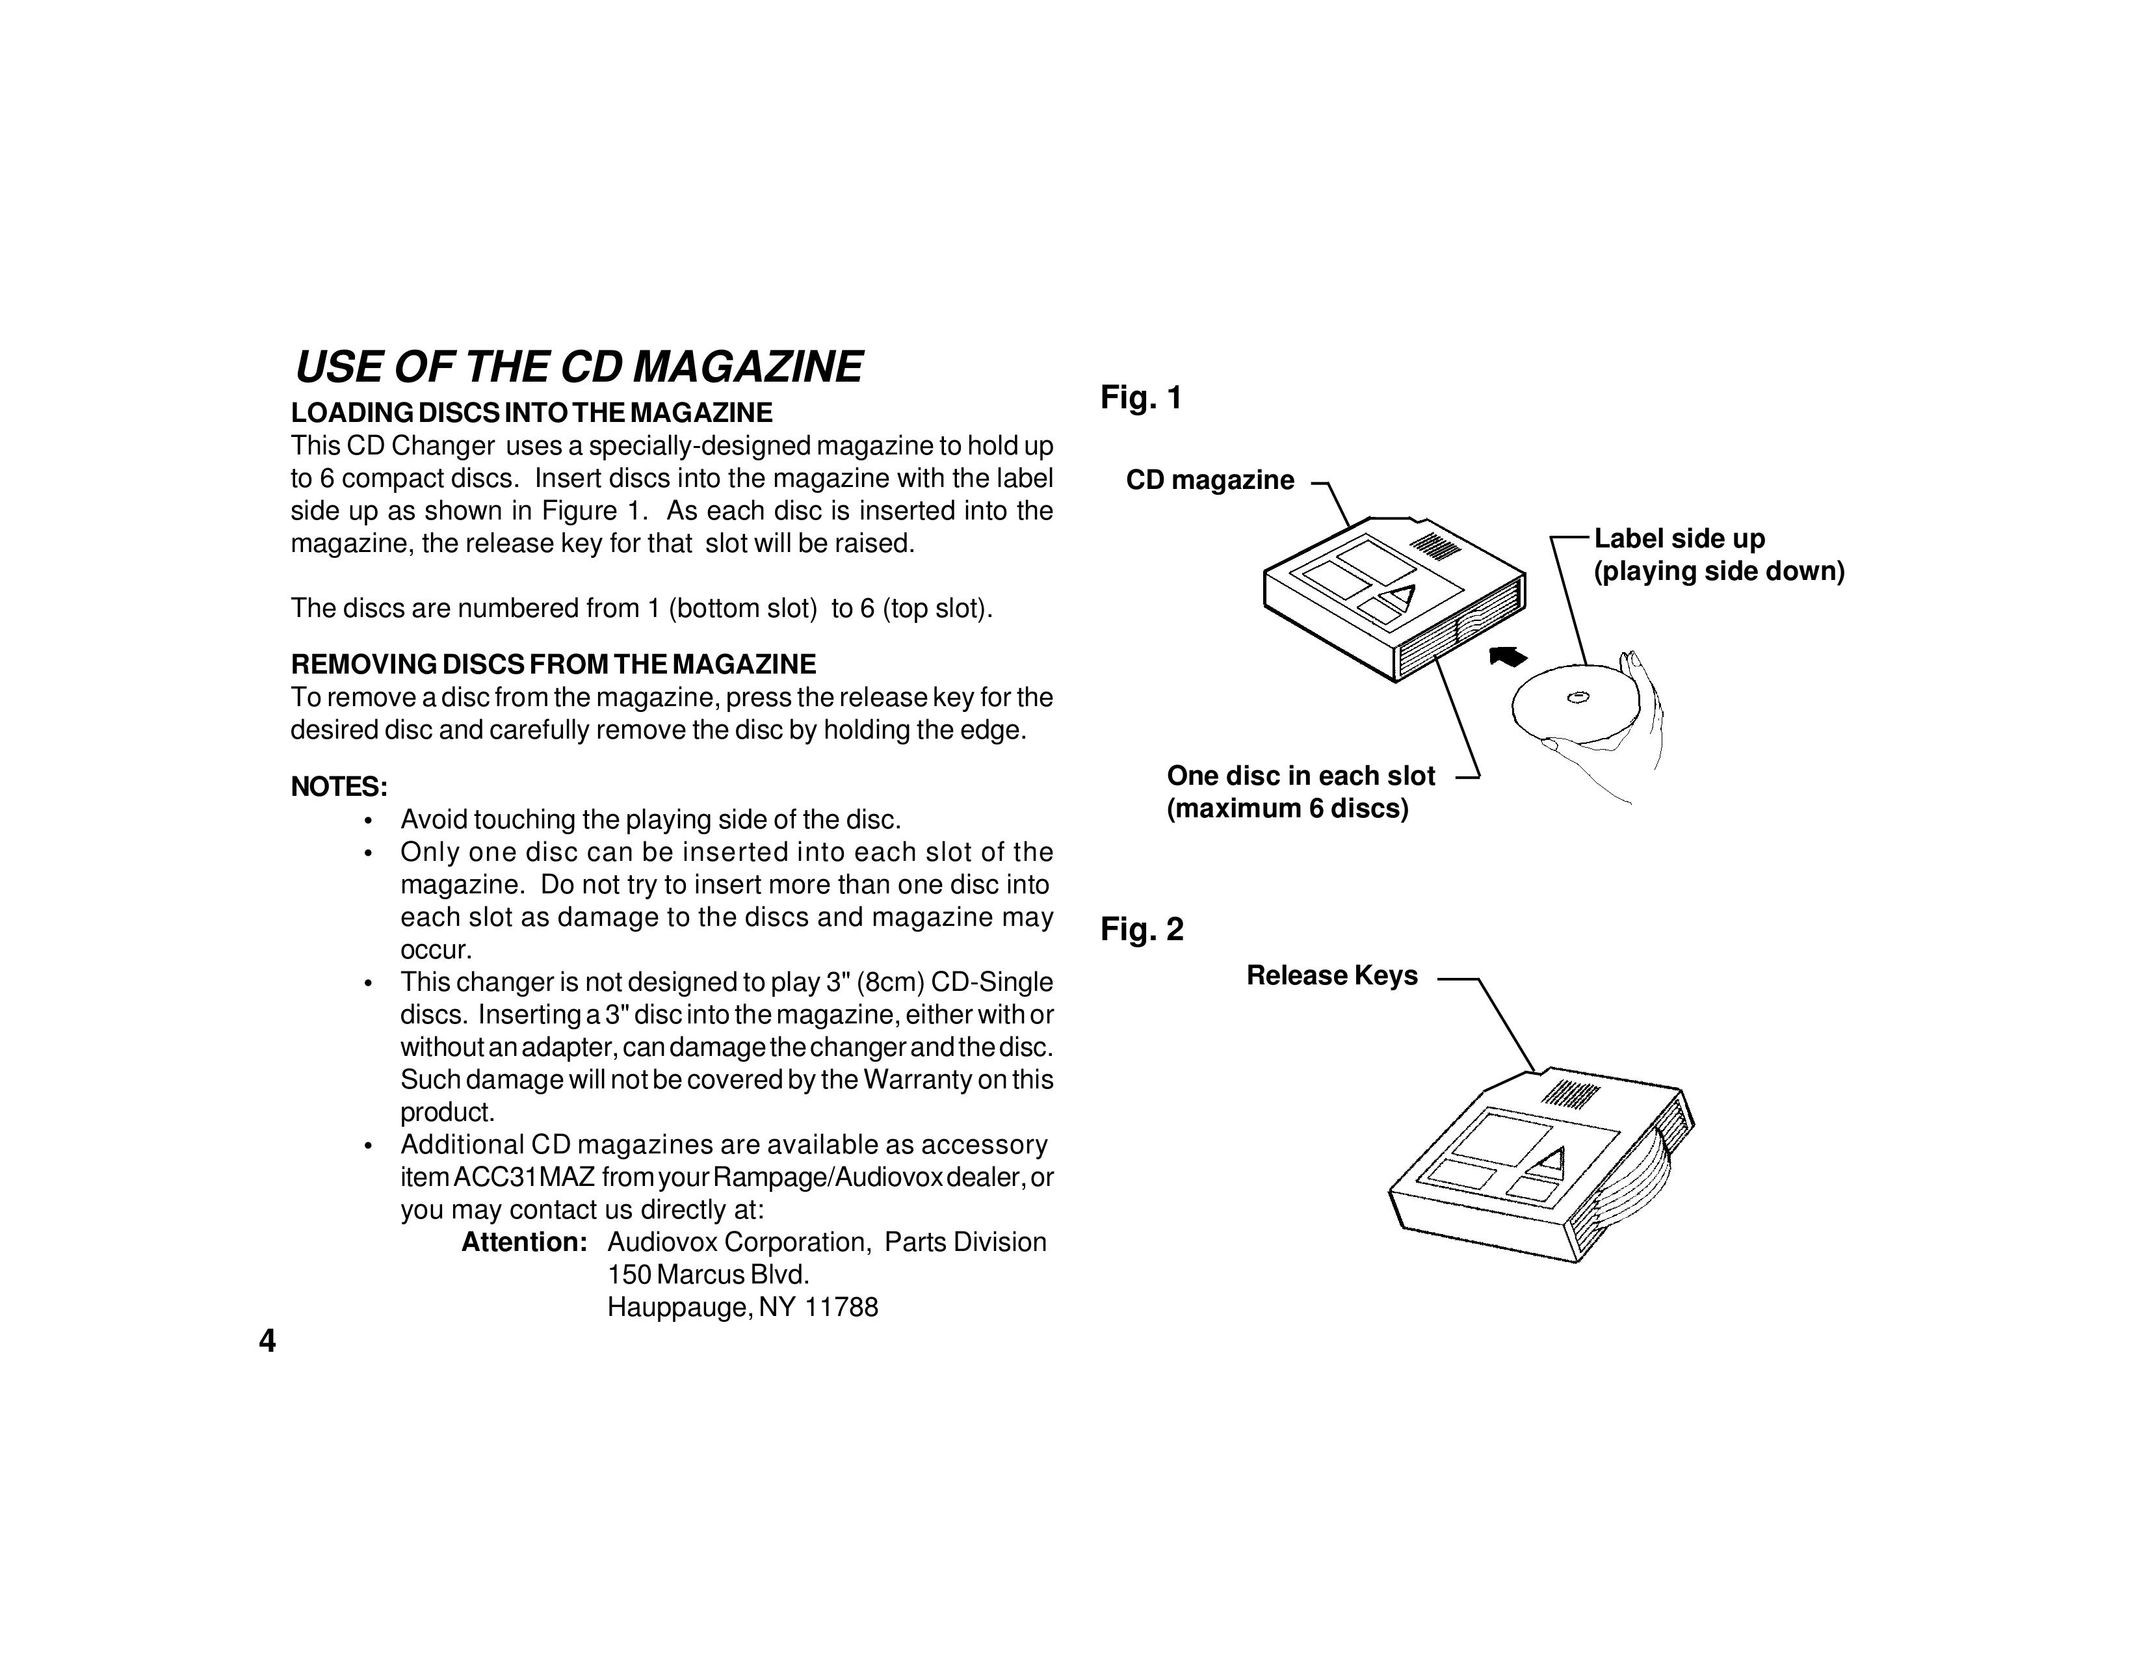 Audiovox ACC31 CD Player User Manual (Page 4)